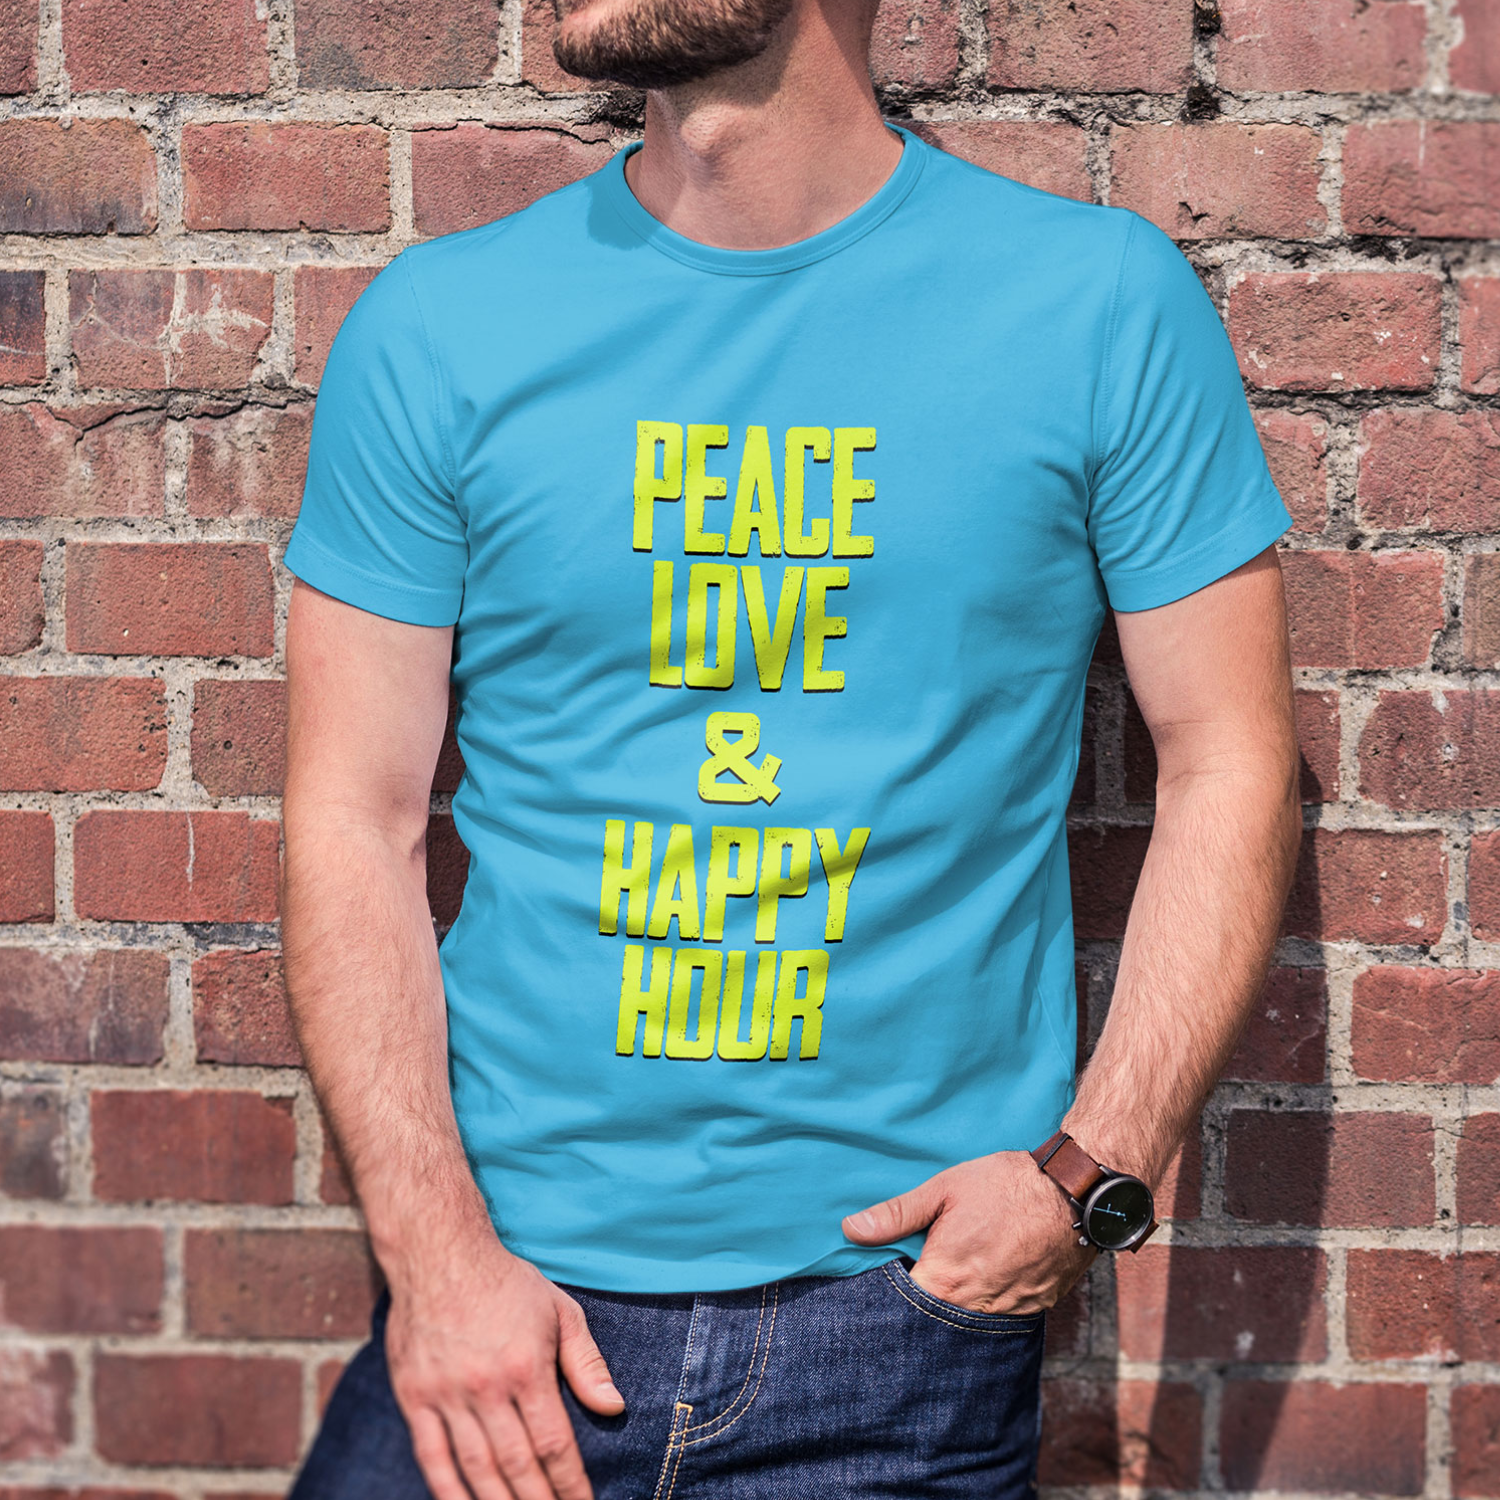 Good and Hour Peace Vibes Happy T-Shirt Love –